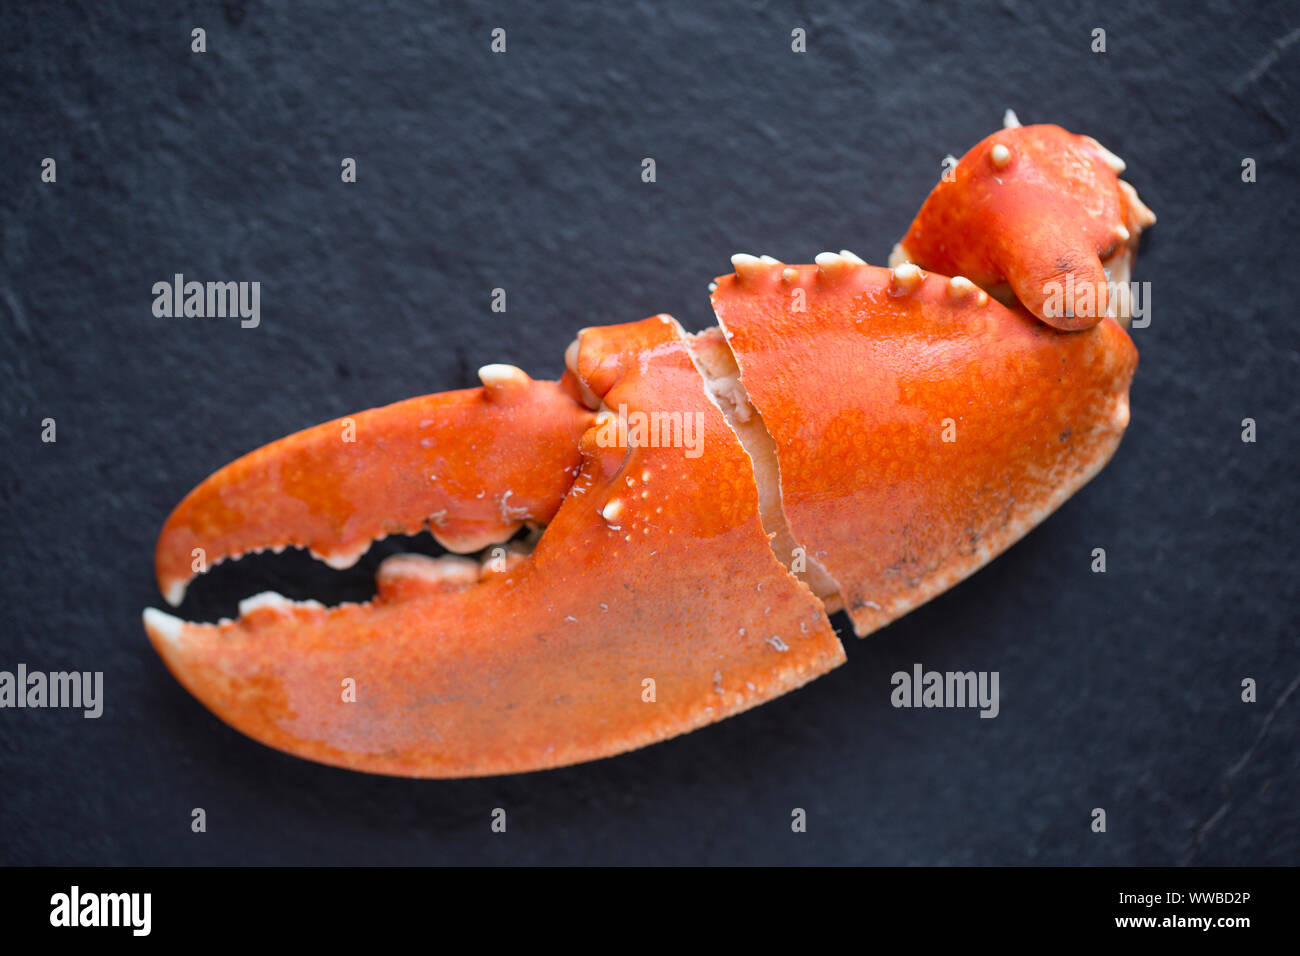 A single, boiled lobster claw from a common lobster, Homarus gammarus, that has been cracked ready for eating. Presented on a dark slate background. E Stock Photo